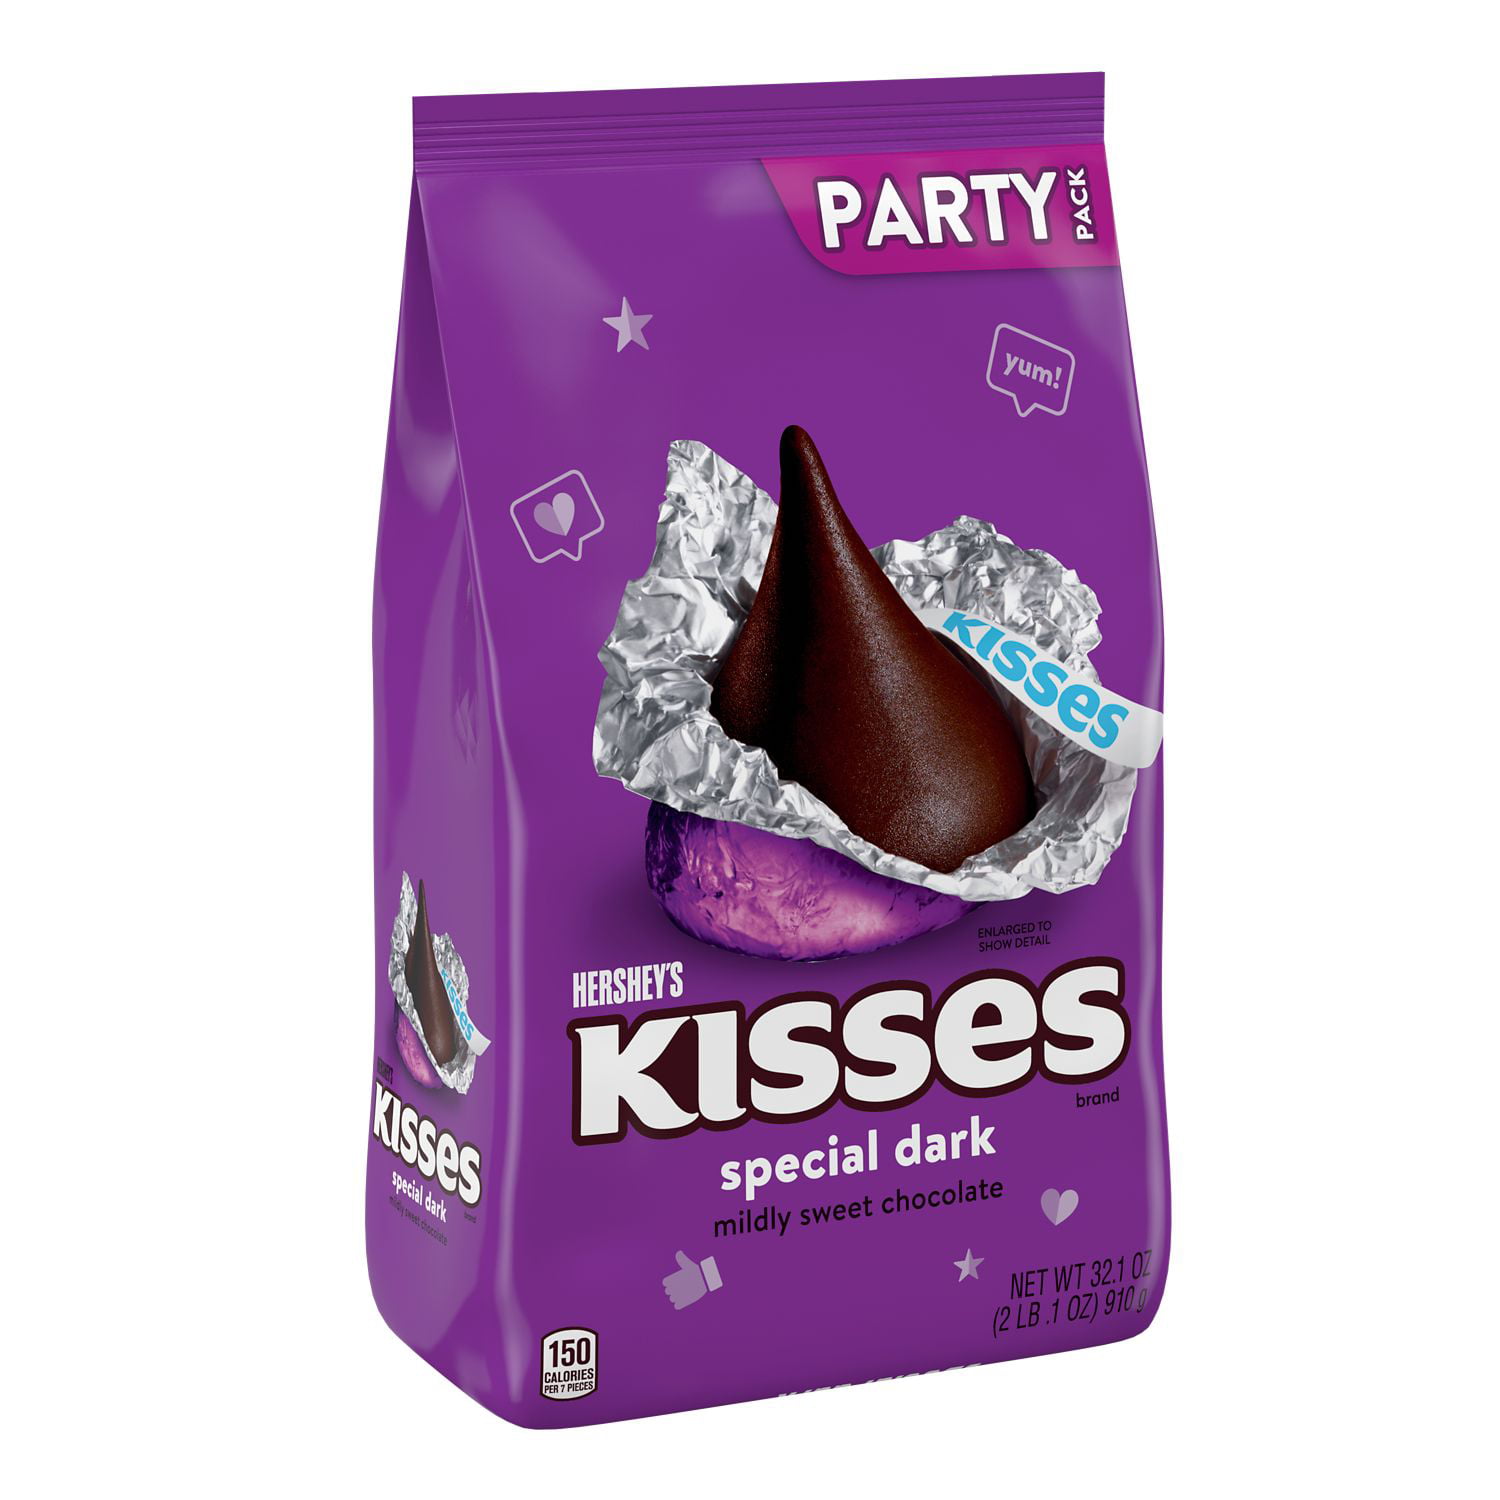 108 UNIQUE BIRTHDAY PARTY DISNEYS FROZEN HERSHEY'S KISS OR 30 NUGGET CANDY LABEL